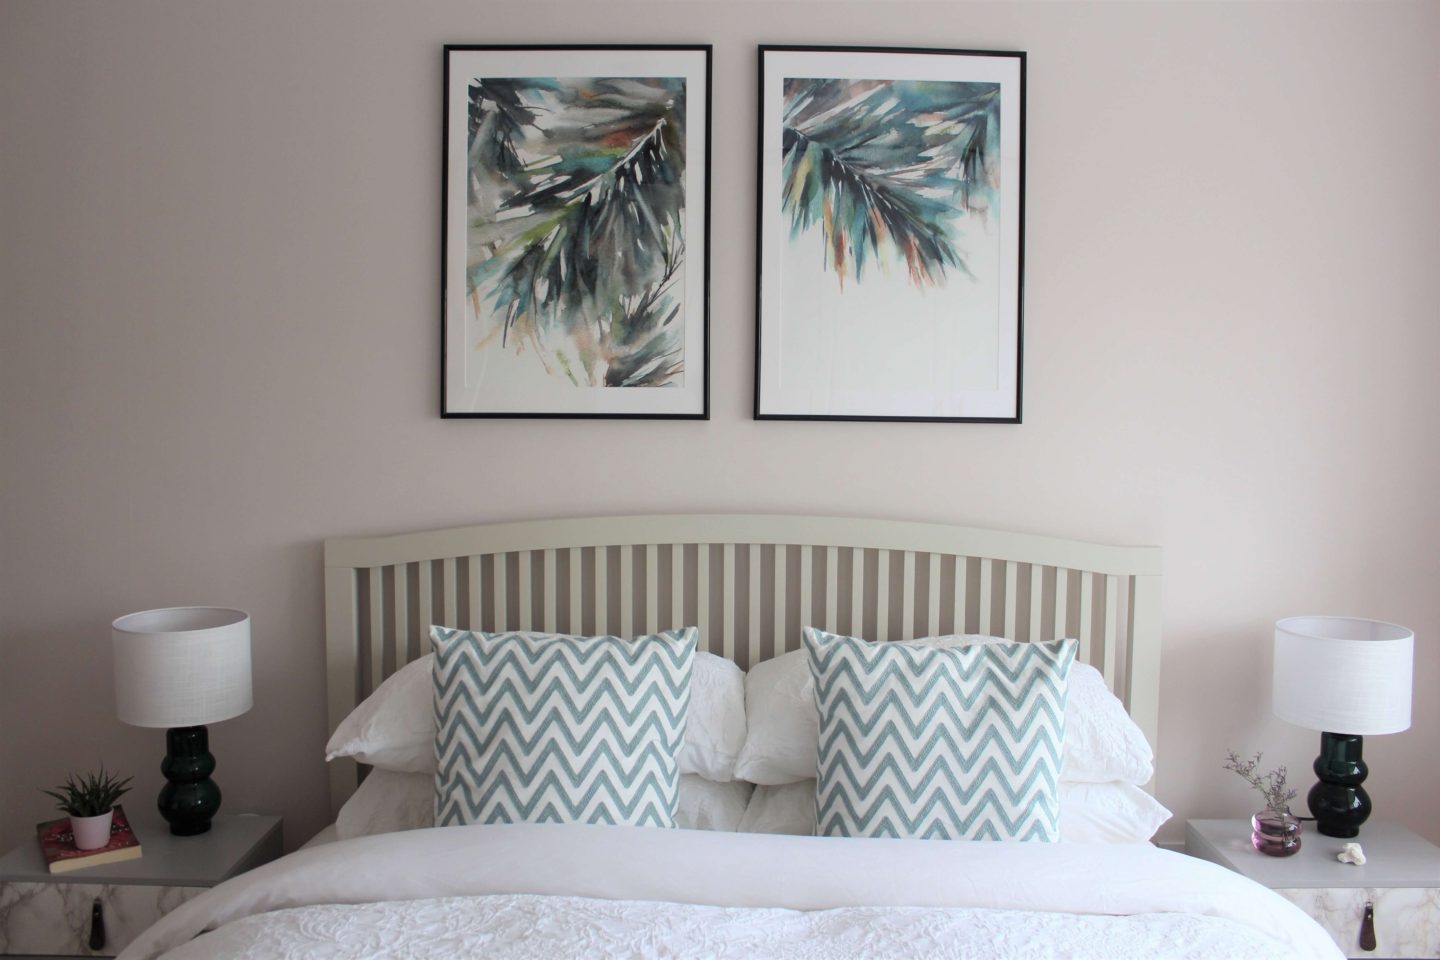 Bedrrom with pink wall, palm leaves artwork and white bed linen.